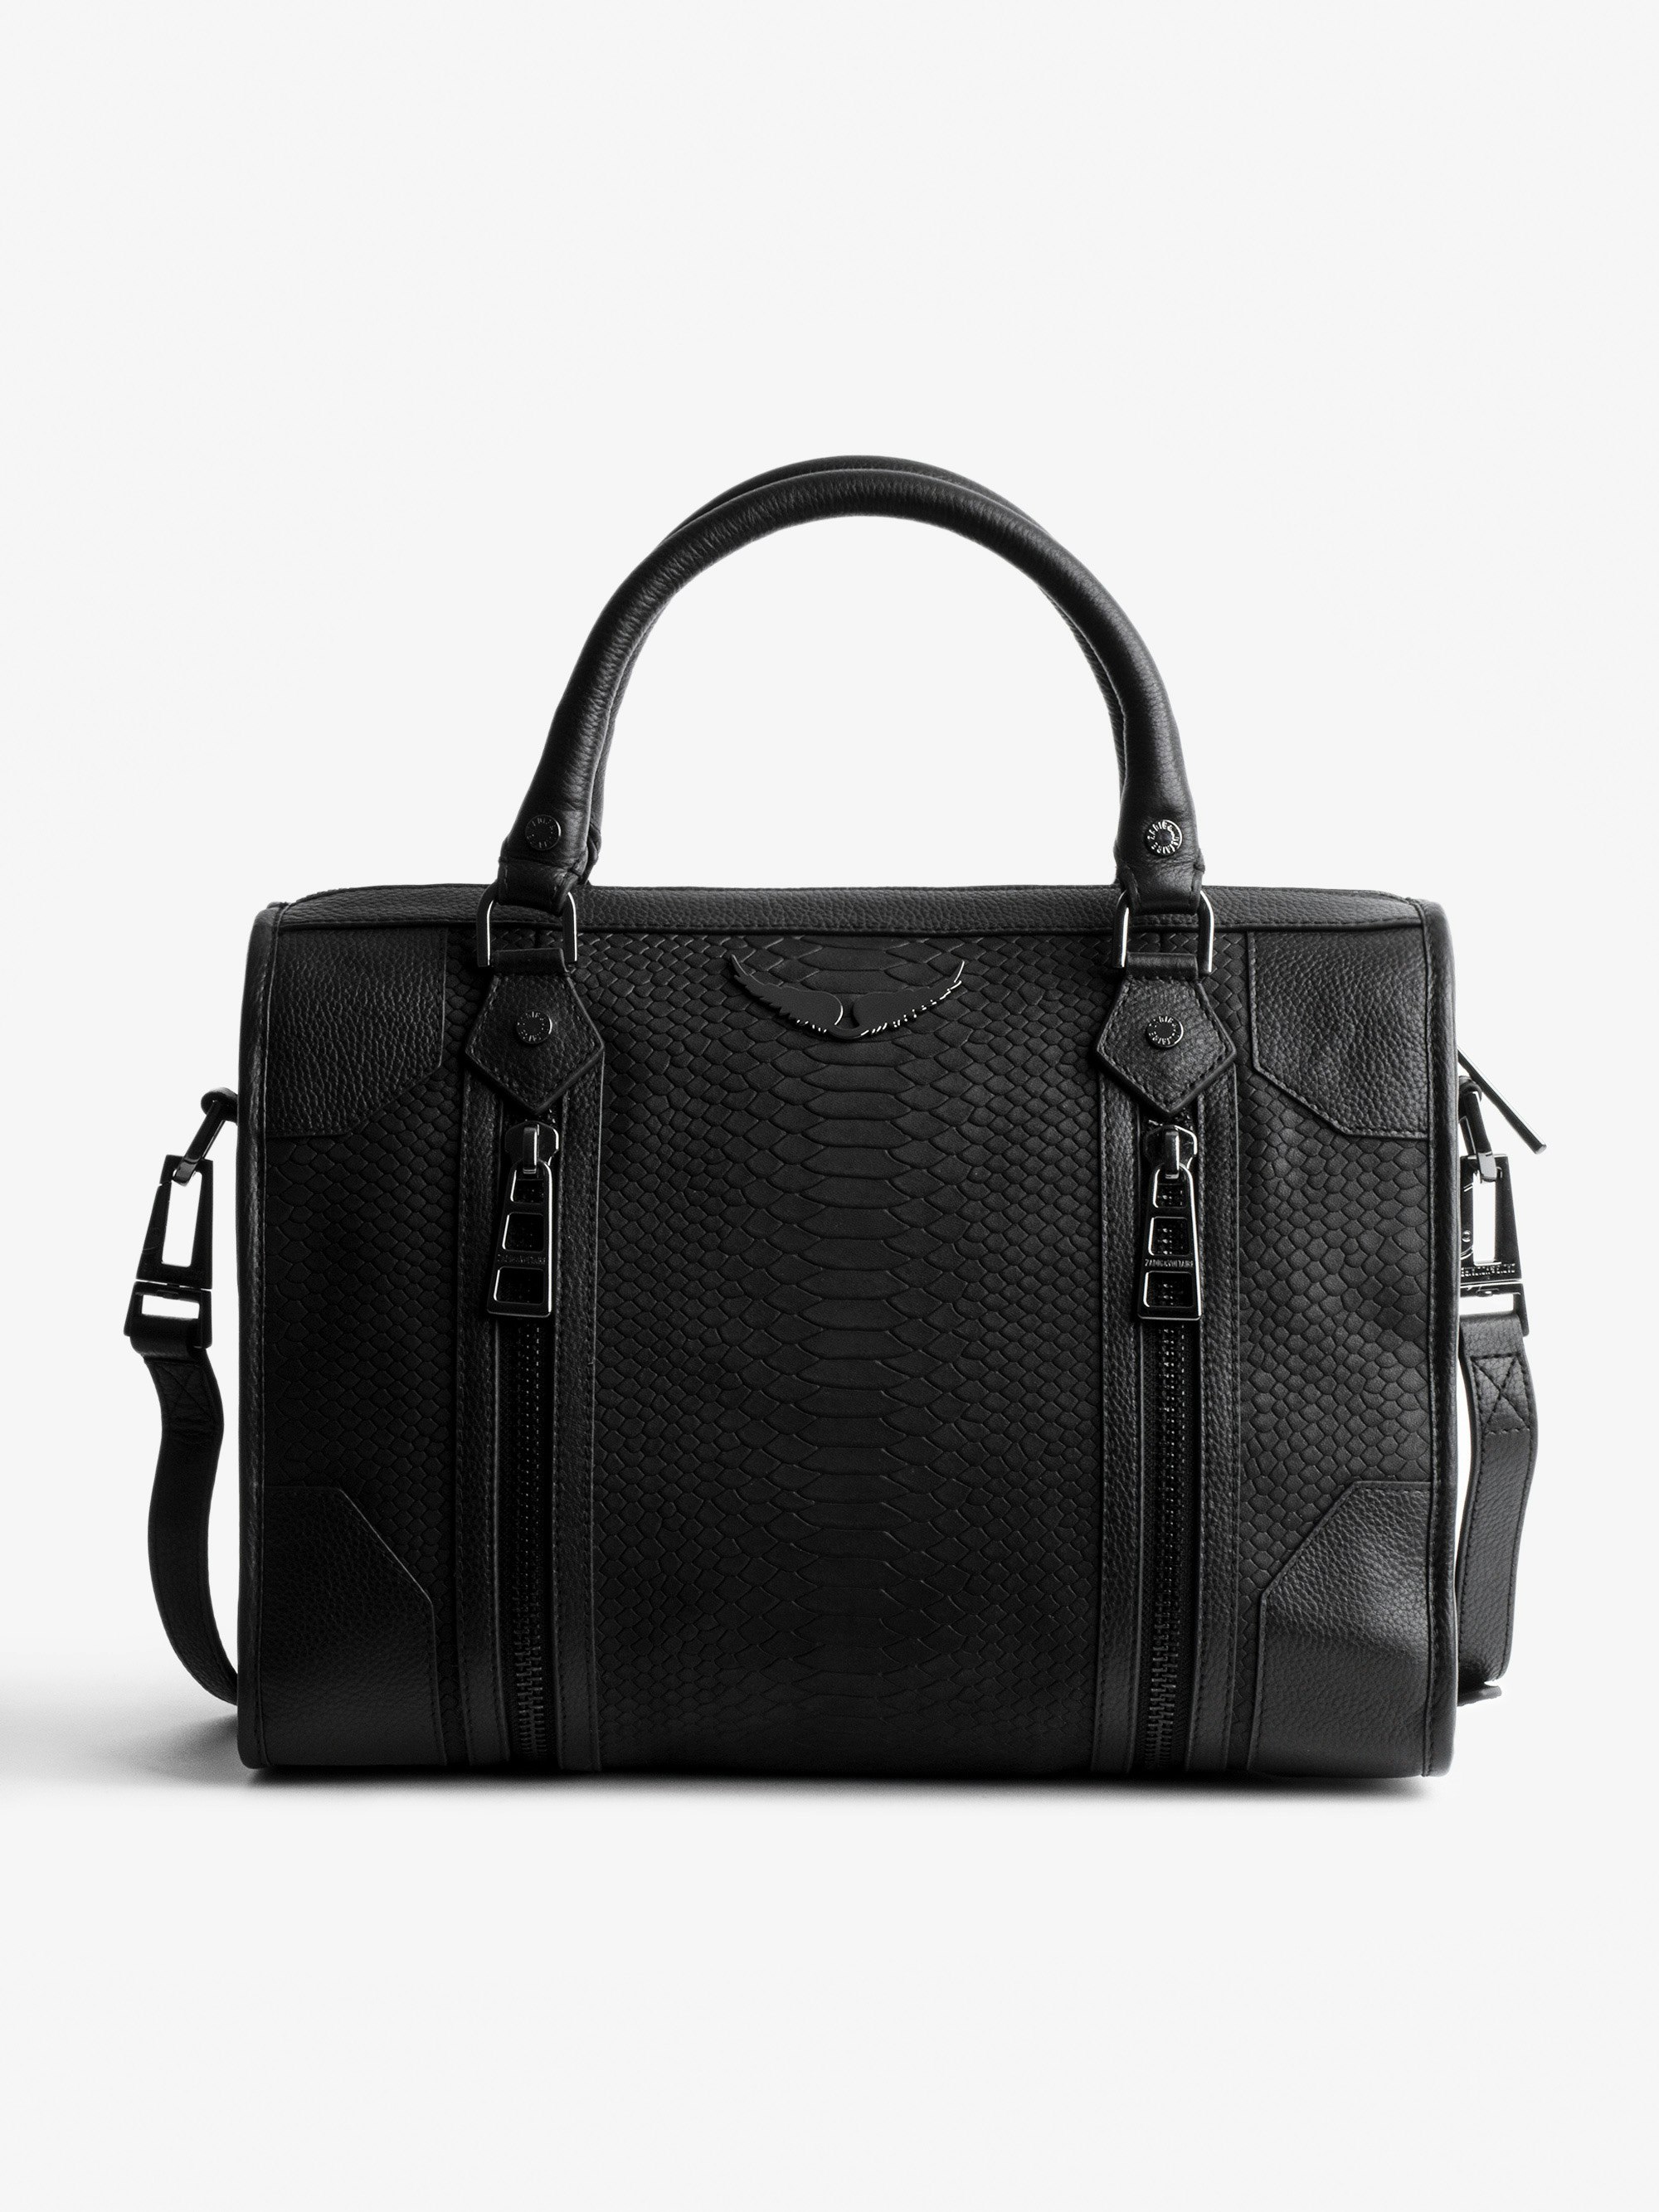 Soft Savage Sunny Medium #2 Bag - Women's Voltaire black python-effect leather bag with handle and shoulder strap